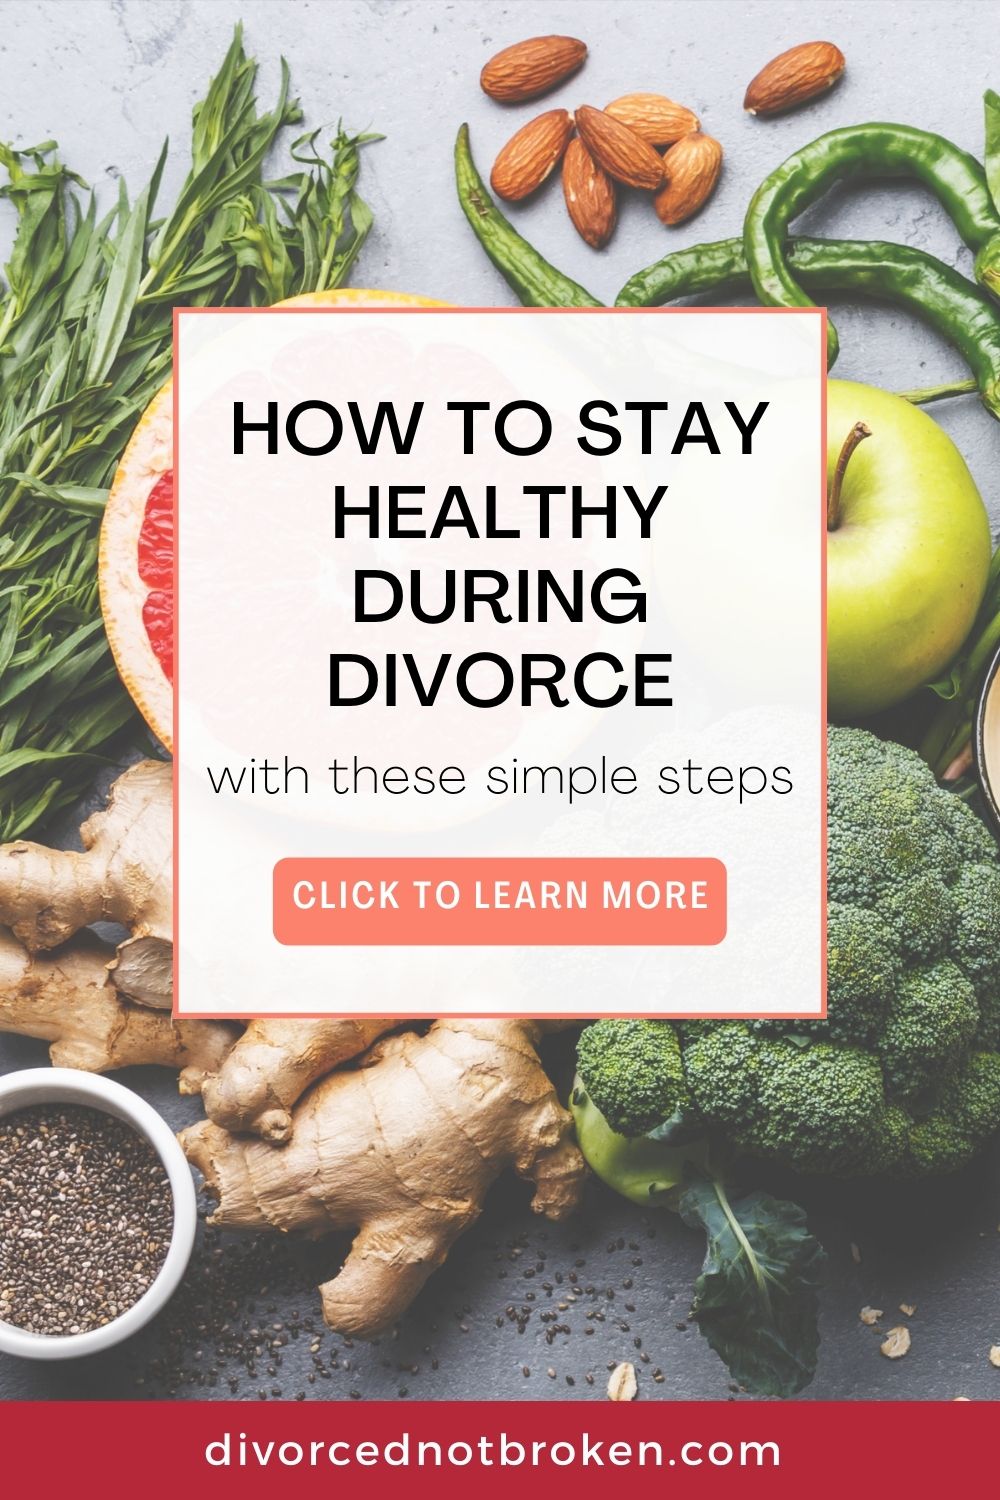 How to Stay Healthy During Divorce graphic text over healthy food in the background.